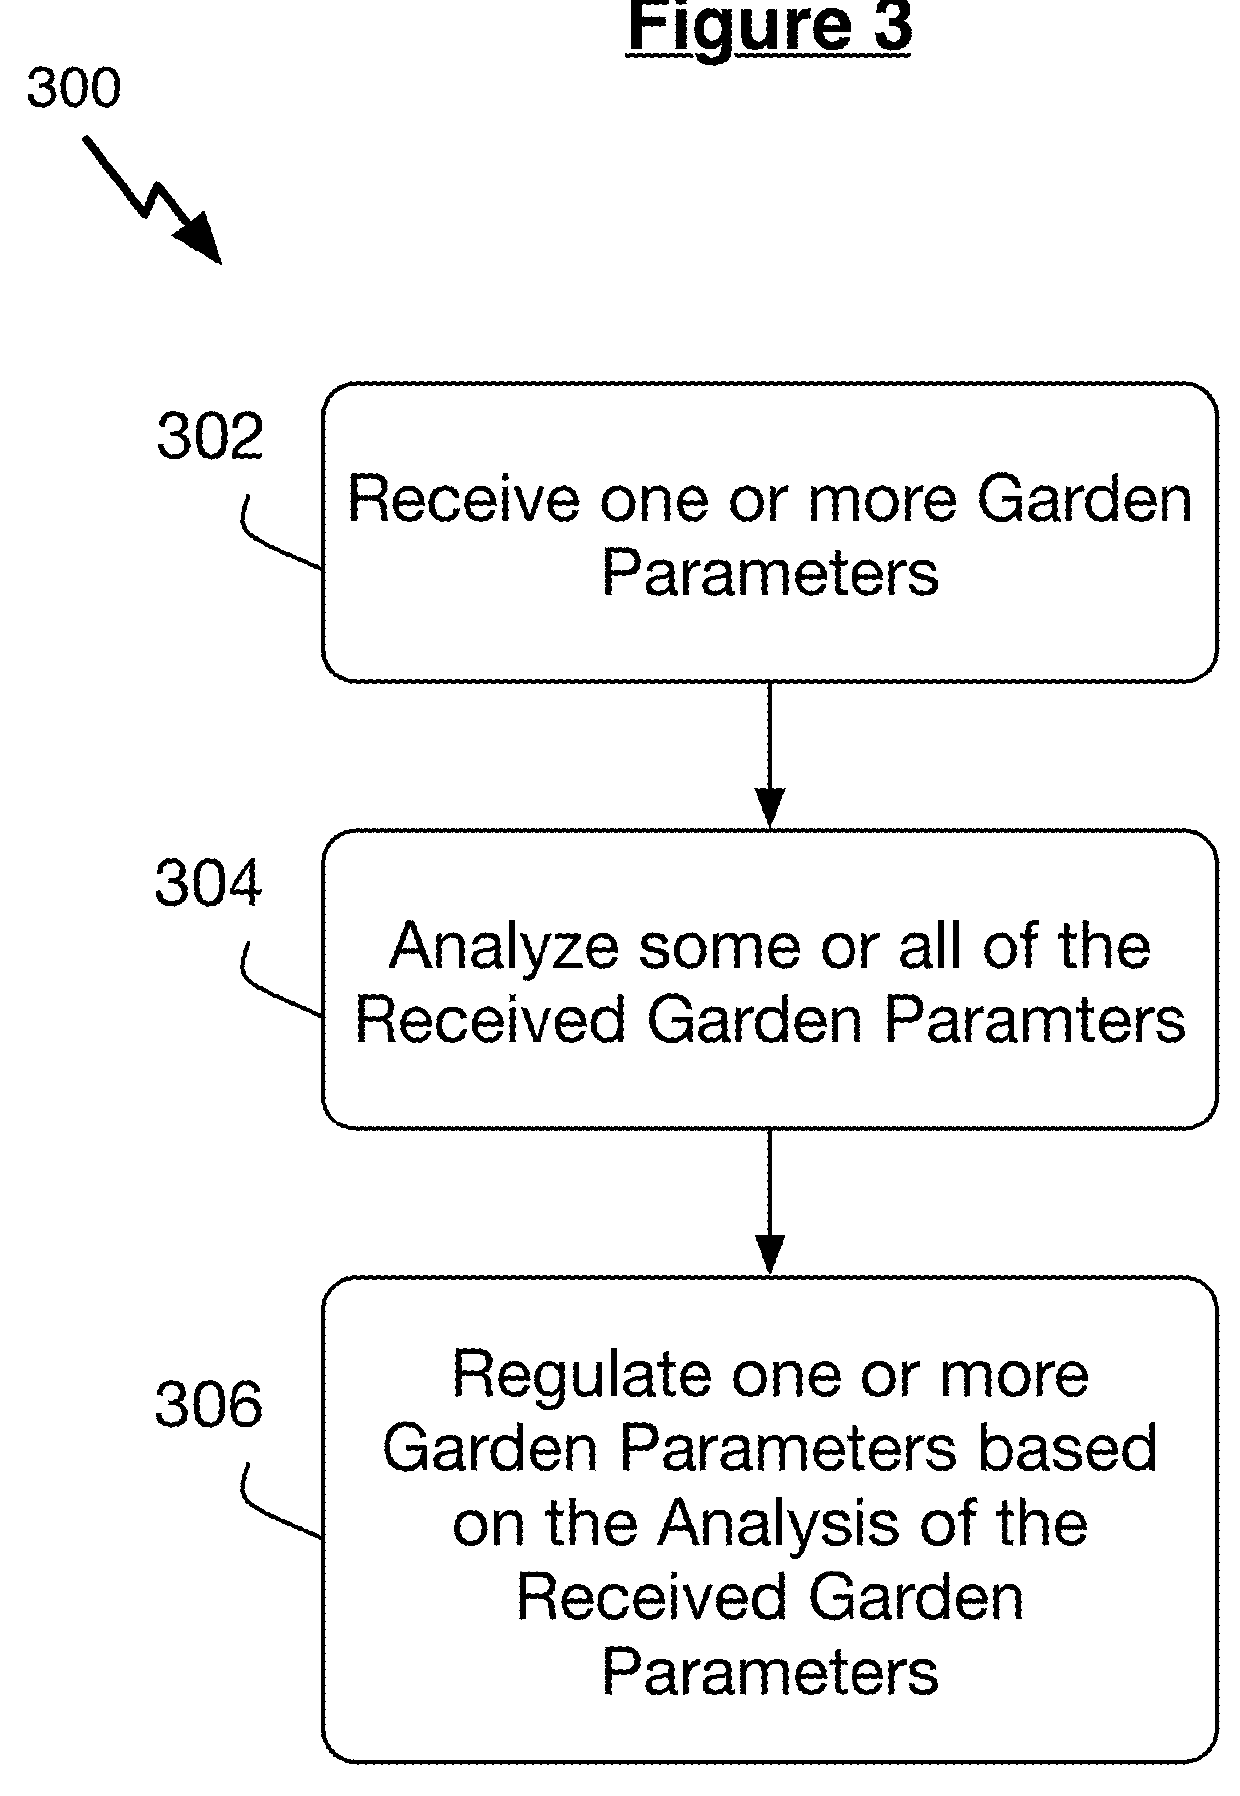 Systems and methods for dynamically collecting, analyzing, and regulating garden parameters